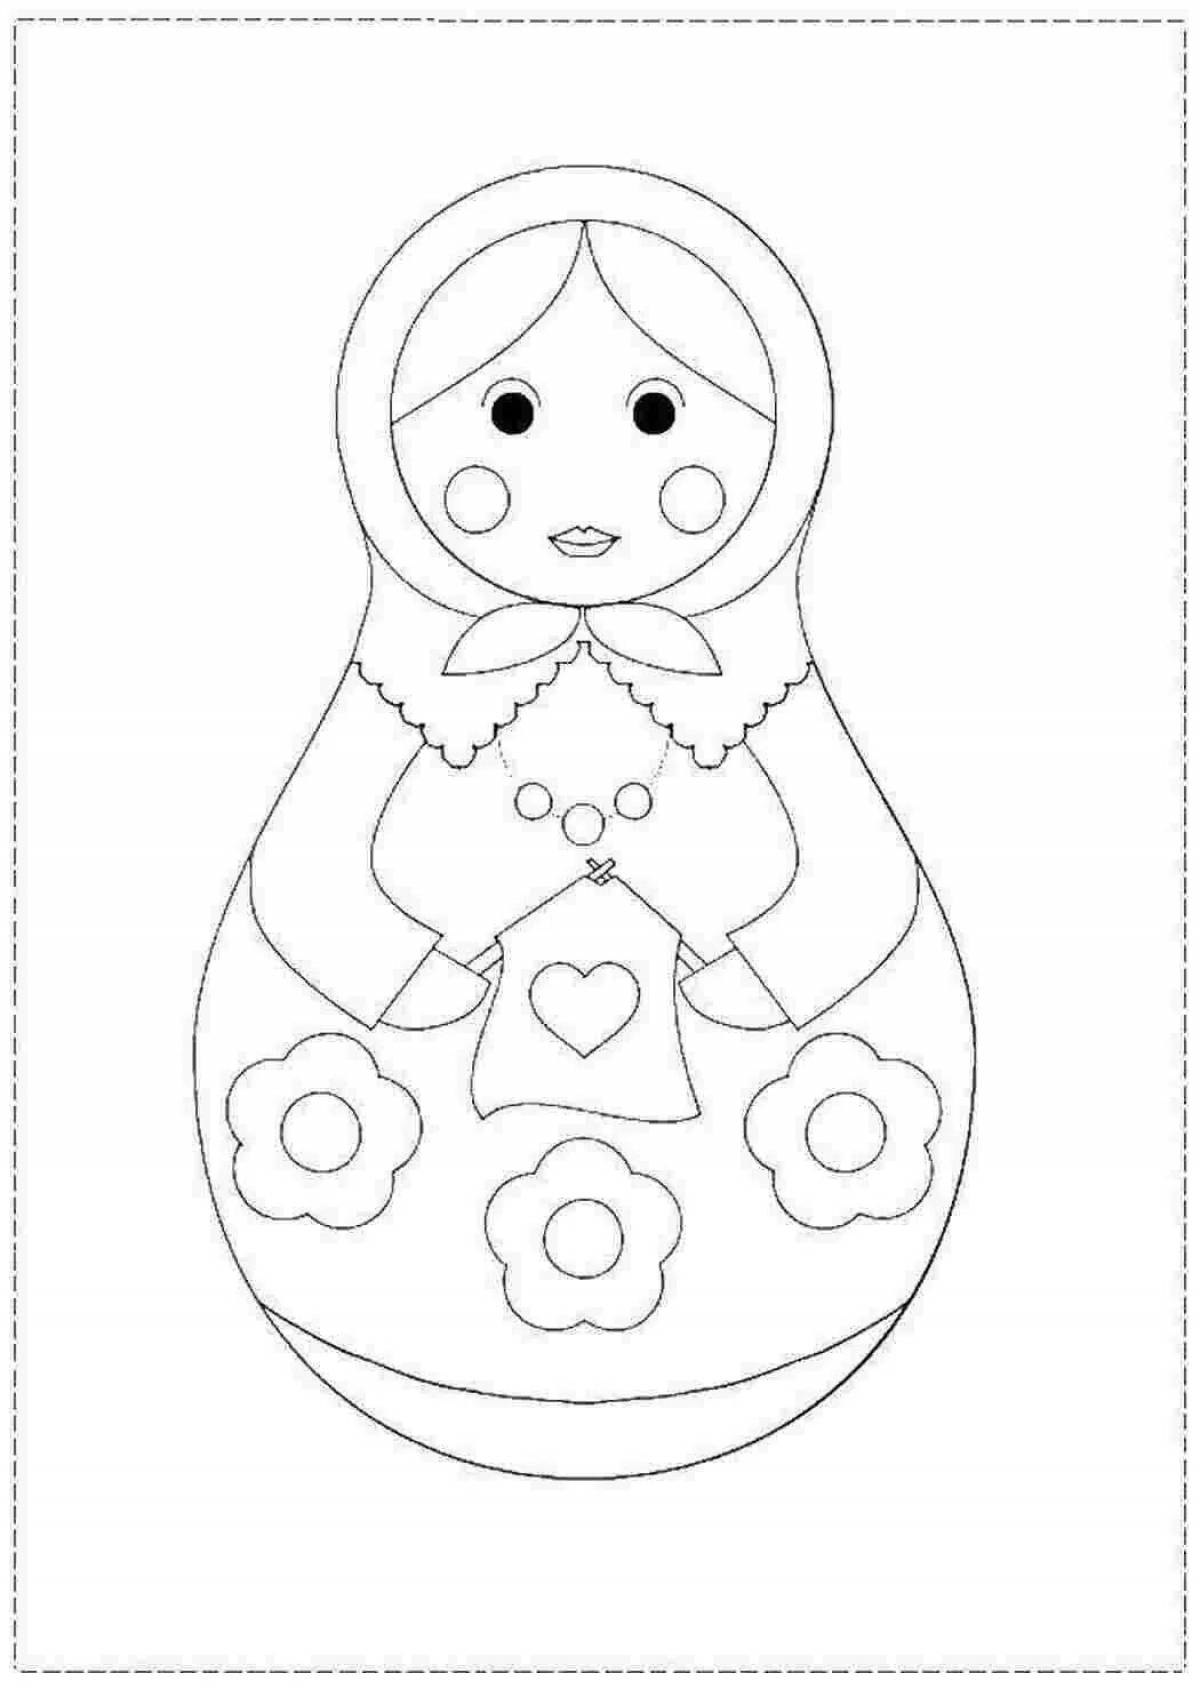 Coloring pages of folk toys for children 3-4 years old